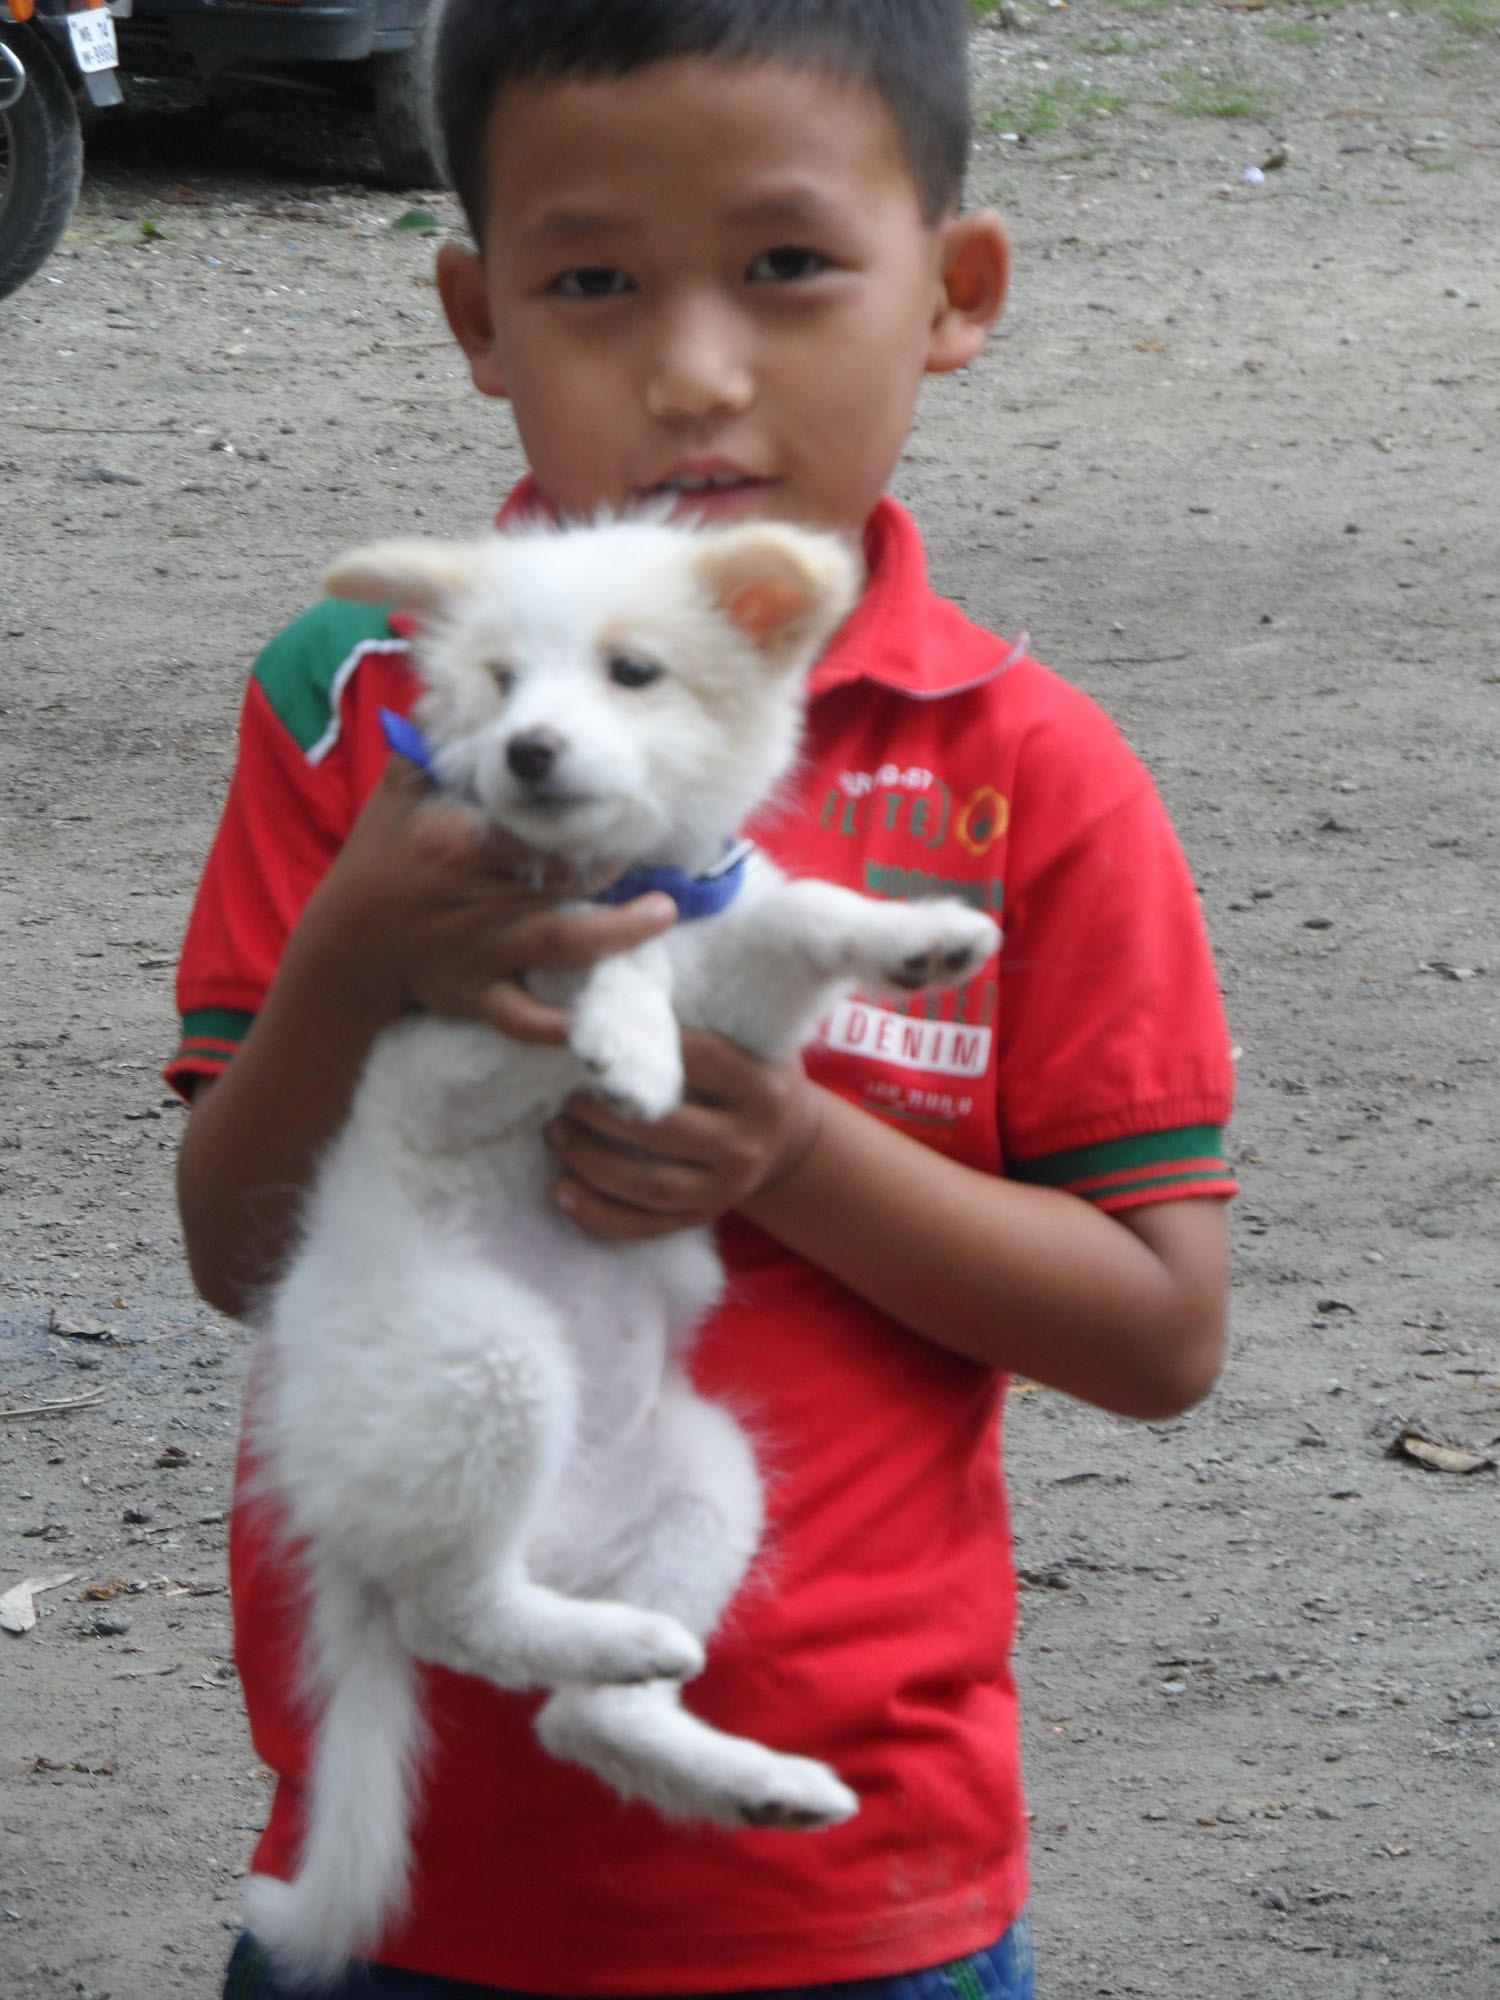 A young lad with his pet for anti-rabies vaccination